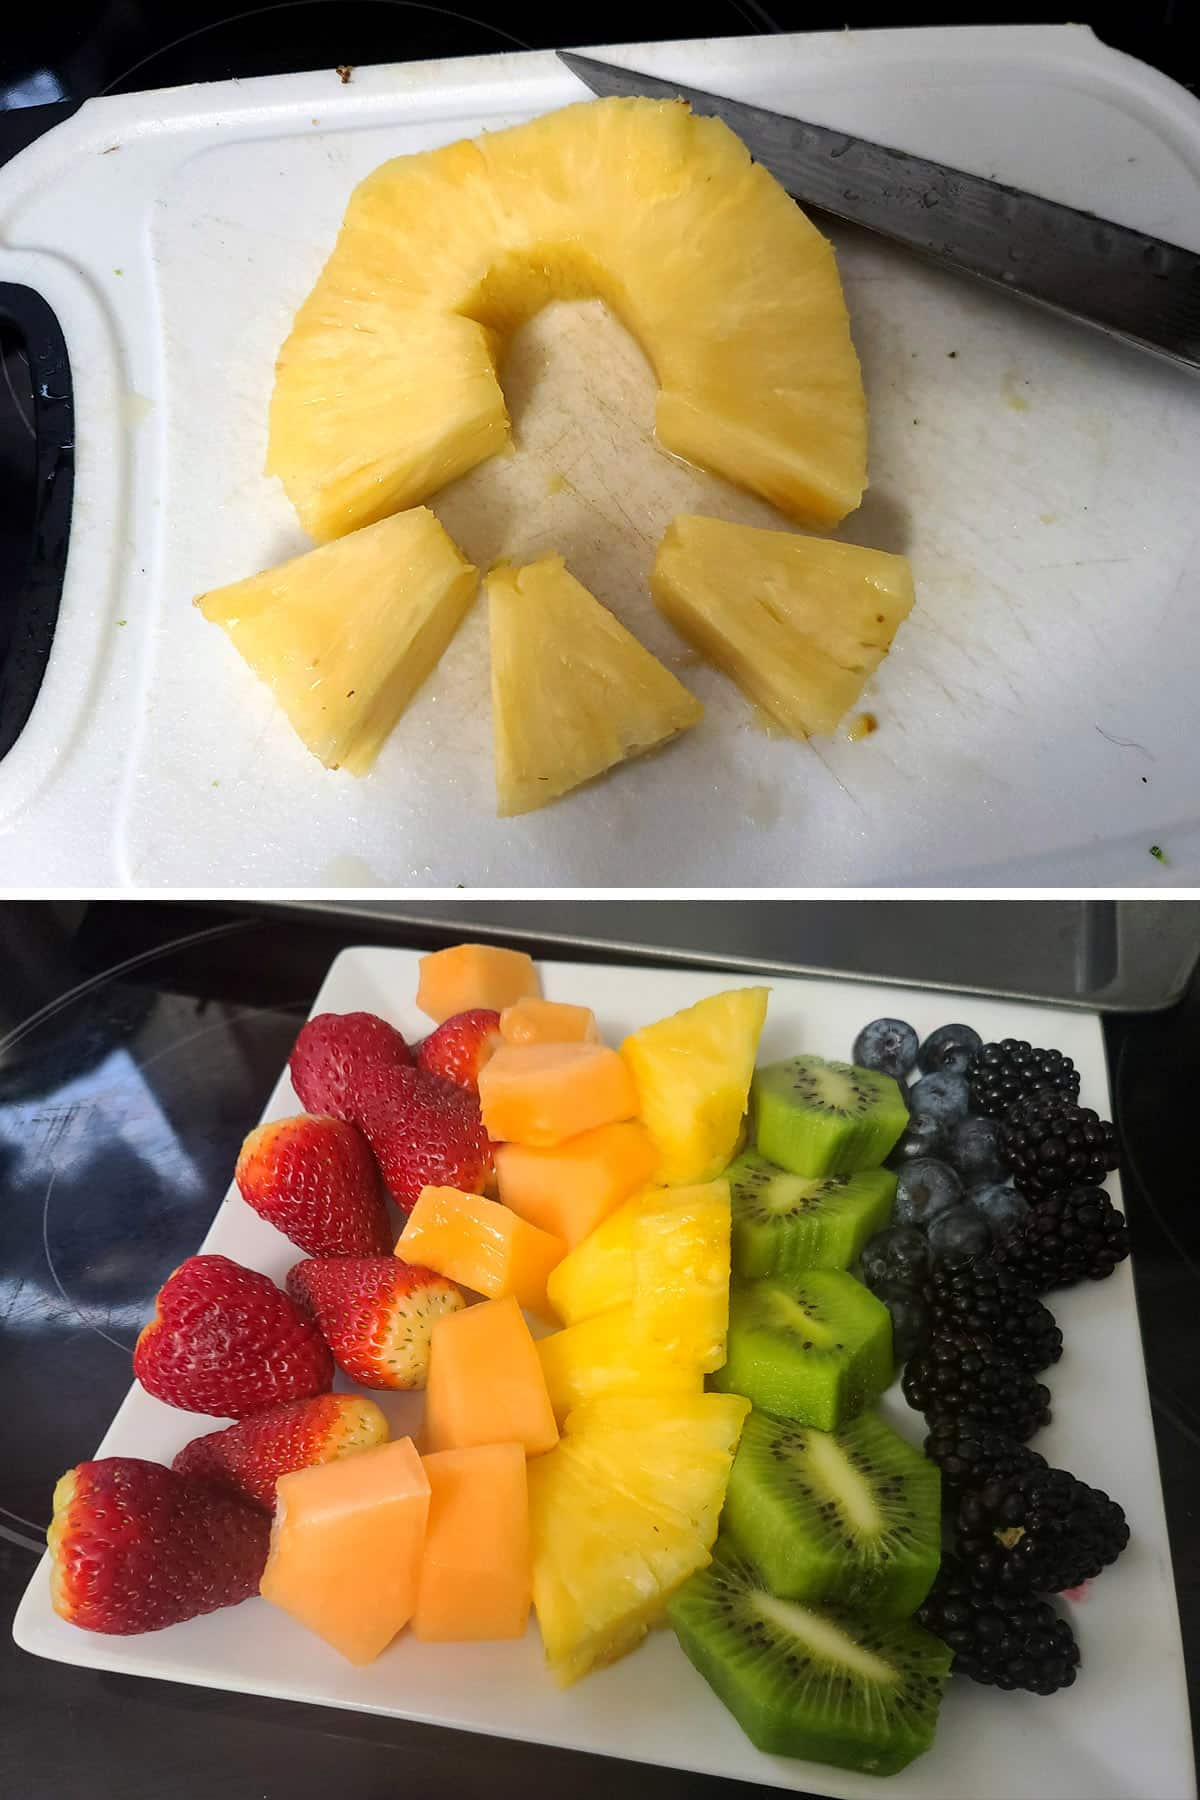 A 2 part image showing a pineapple slice being cut into chunks, and a plate of prepared fruit.